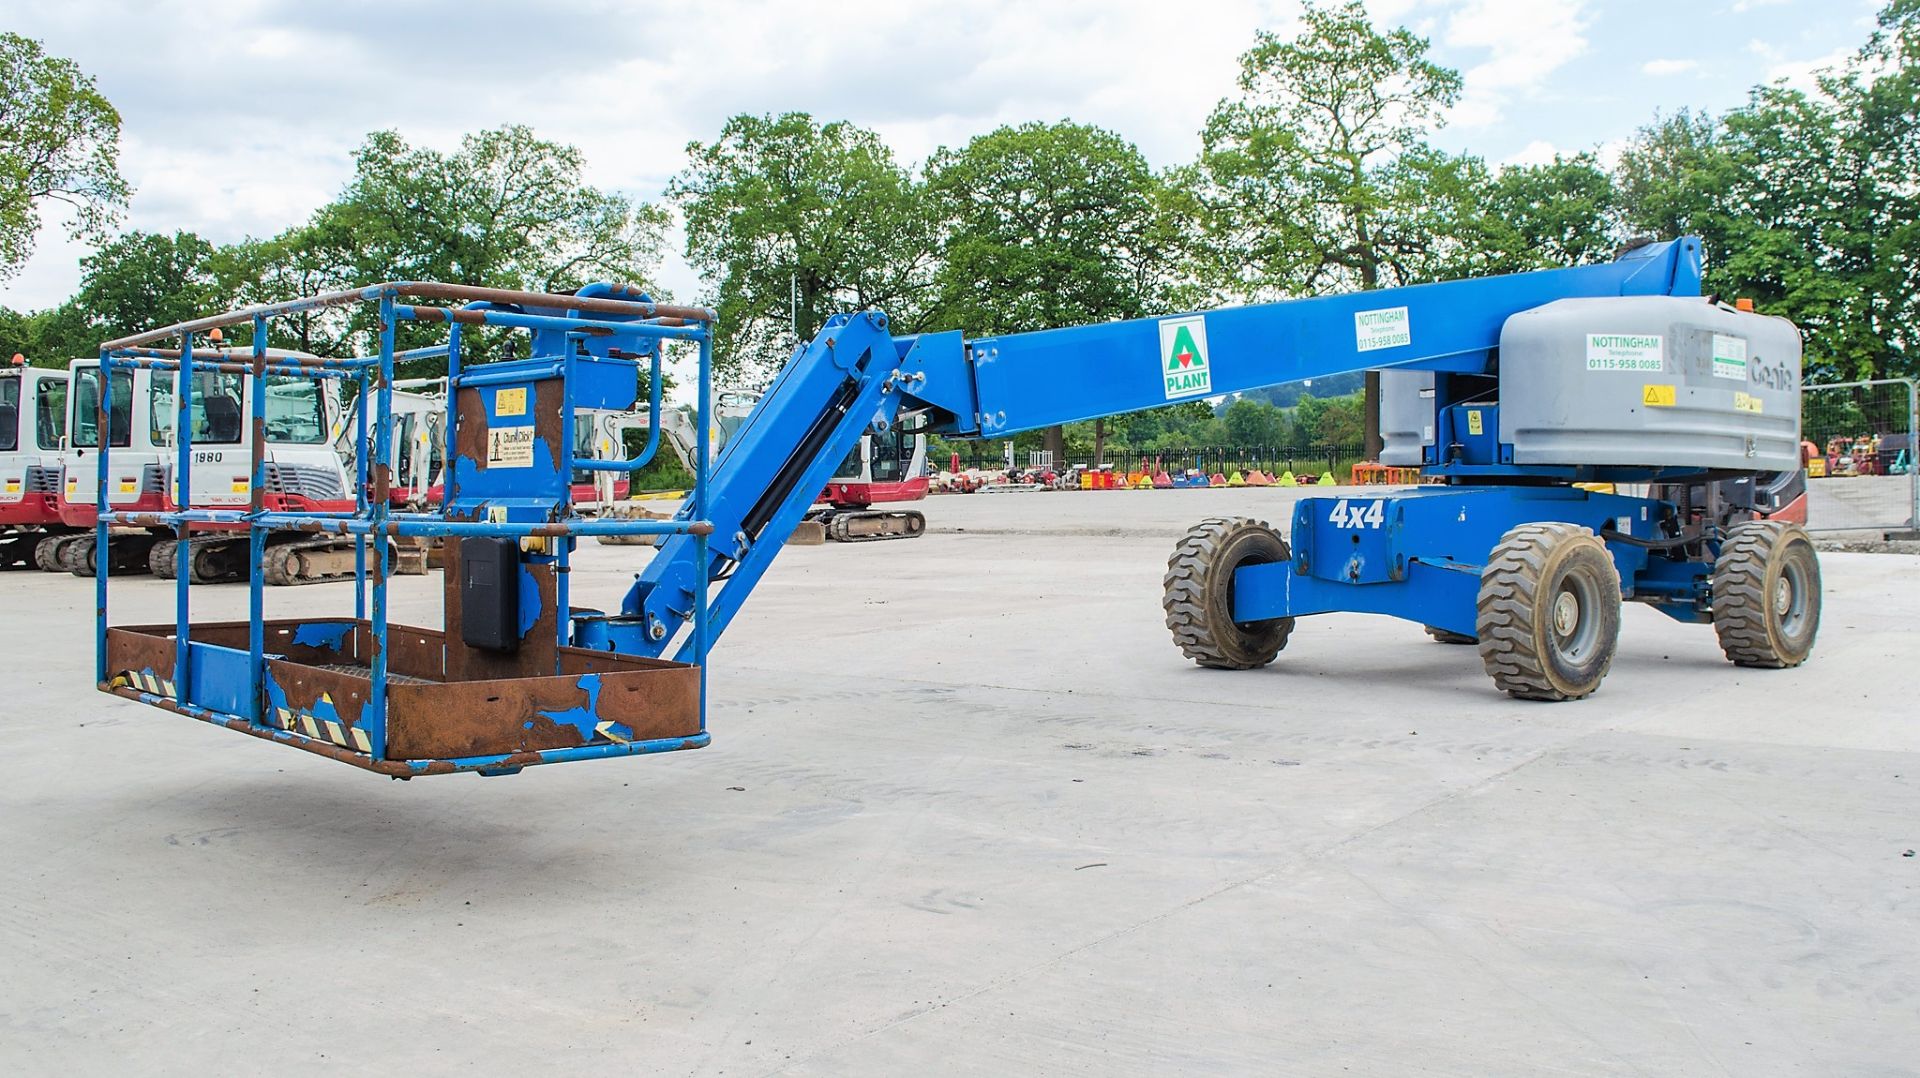 Genie S-45 diesel driven 45 ft boom lift access platform Year: 2014 S/N: 54514-18197 Recorded Hours: